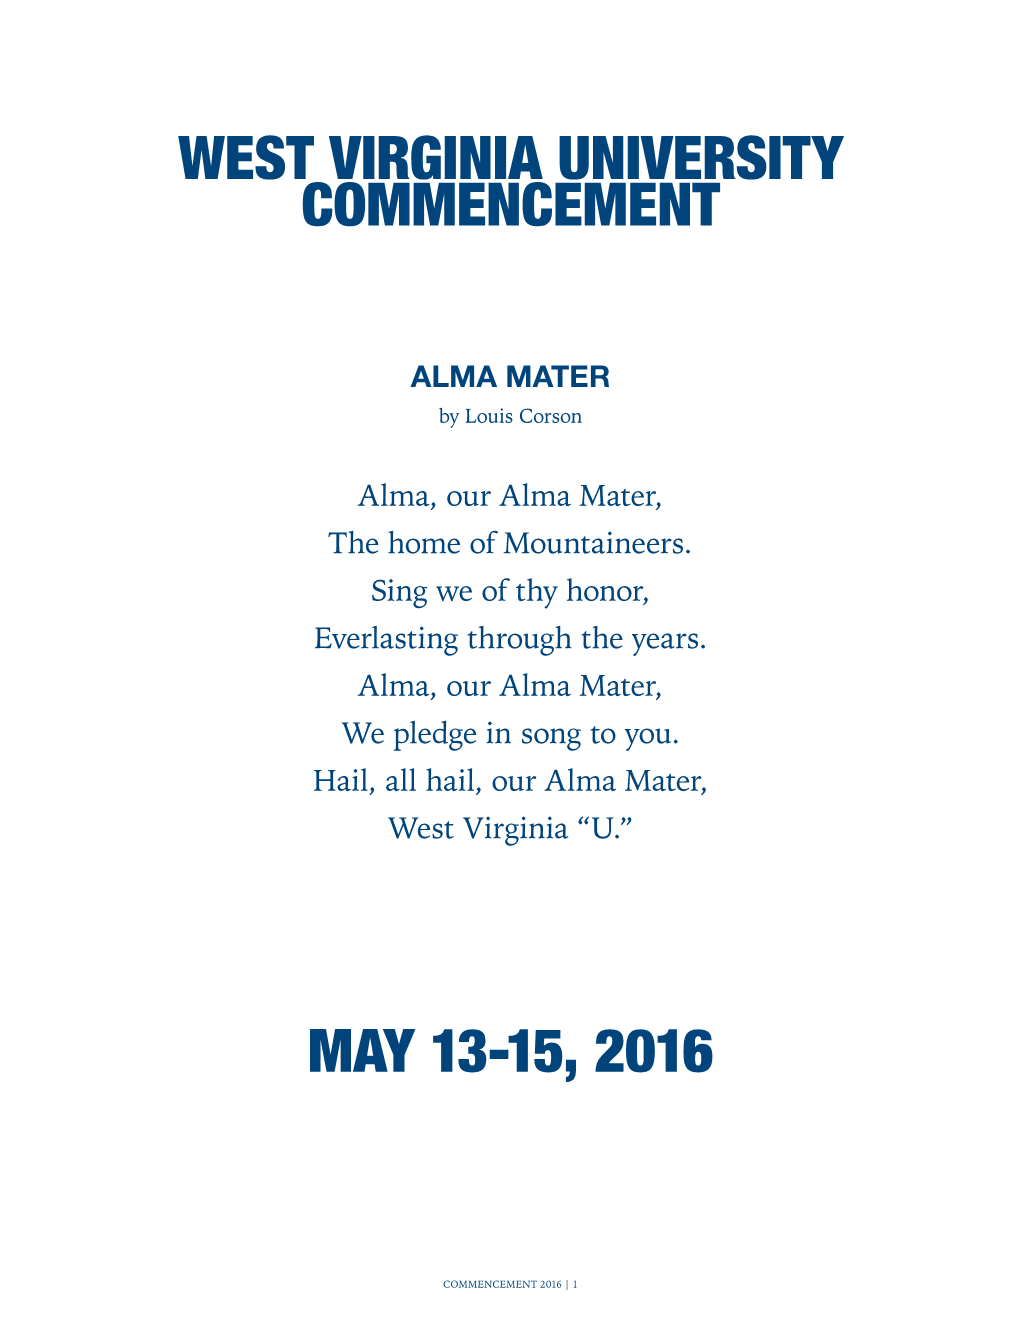 WVU Commencement Program: May 2016